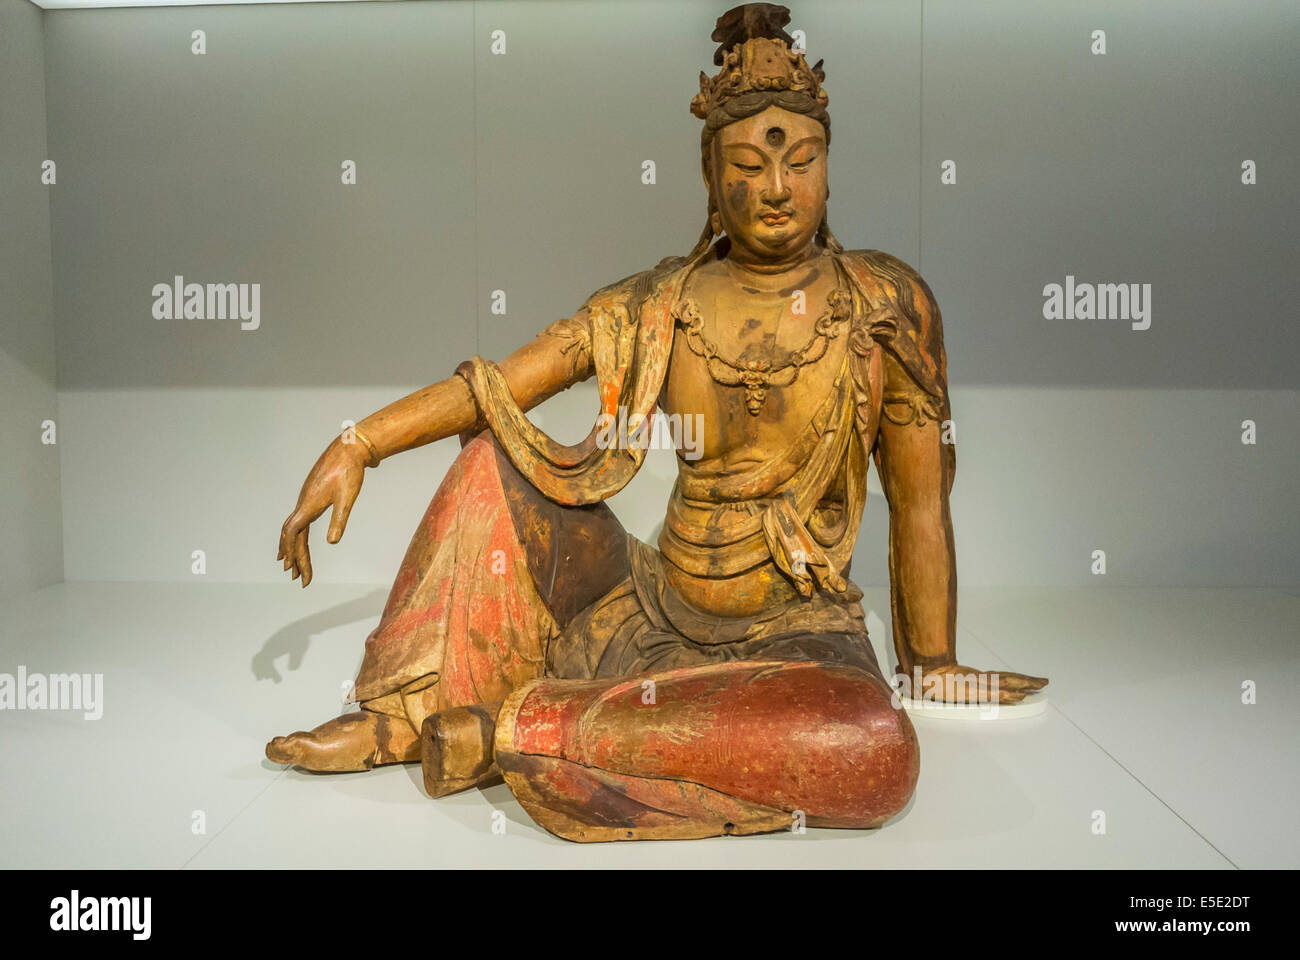 Amsterdam, Holland, inside, Ancient Art on Display, Netherlands, Rijksmuseum, Asian Arts, CHinese Sculpture, Guanyin, (12th c.) ancient civilisation Stock Photo